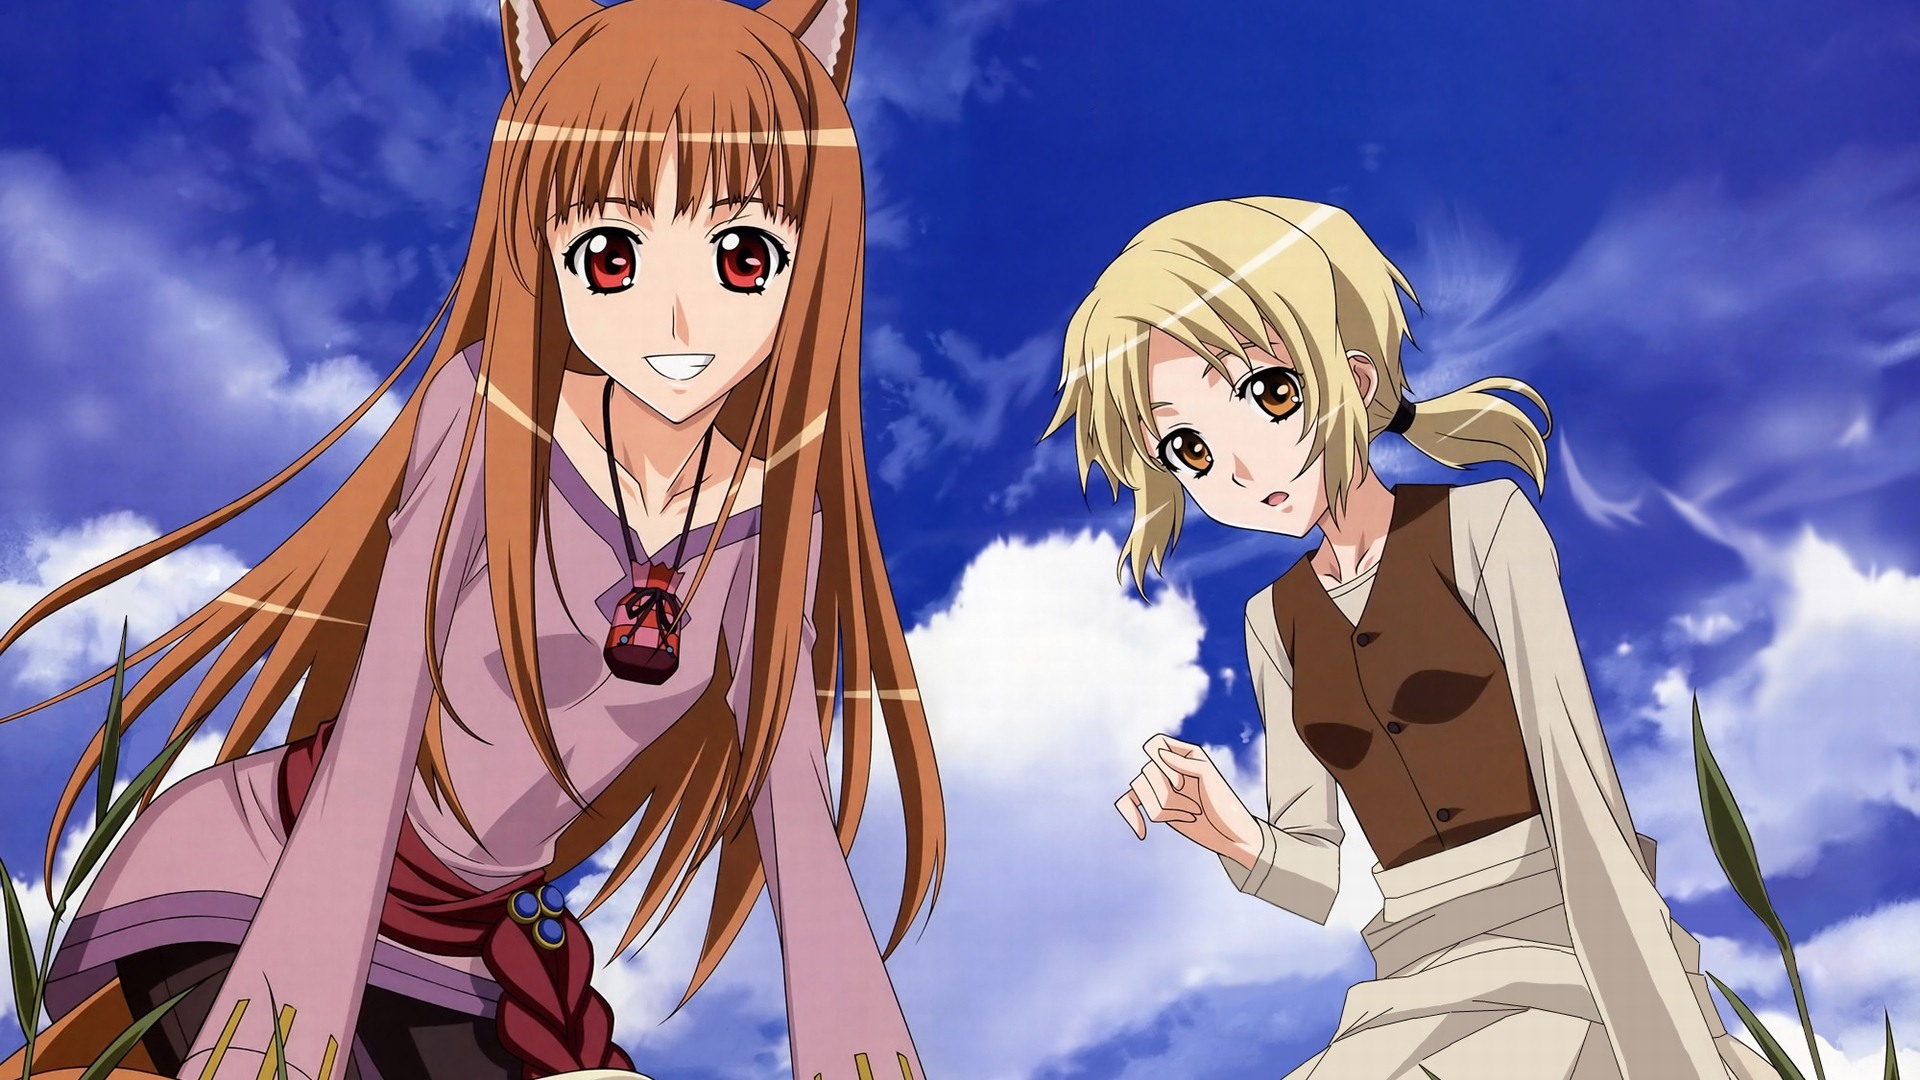 Spice and Wolf HD wallpapers #17 - 1920x1080